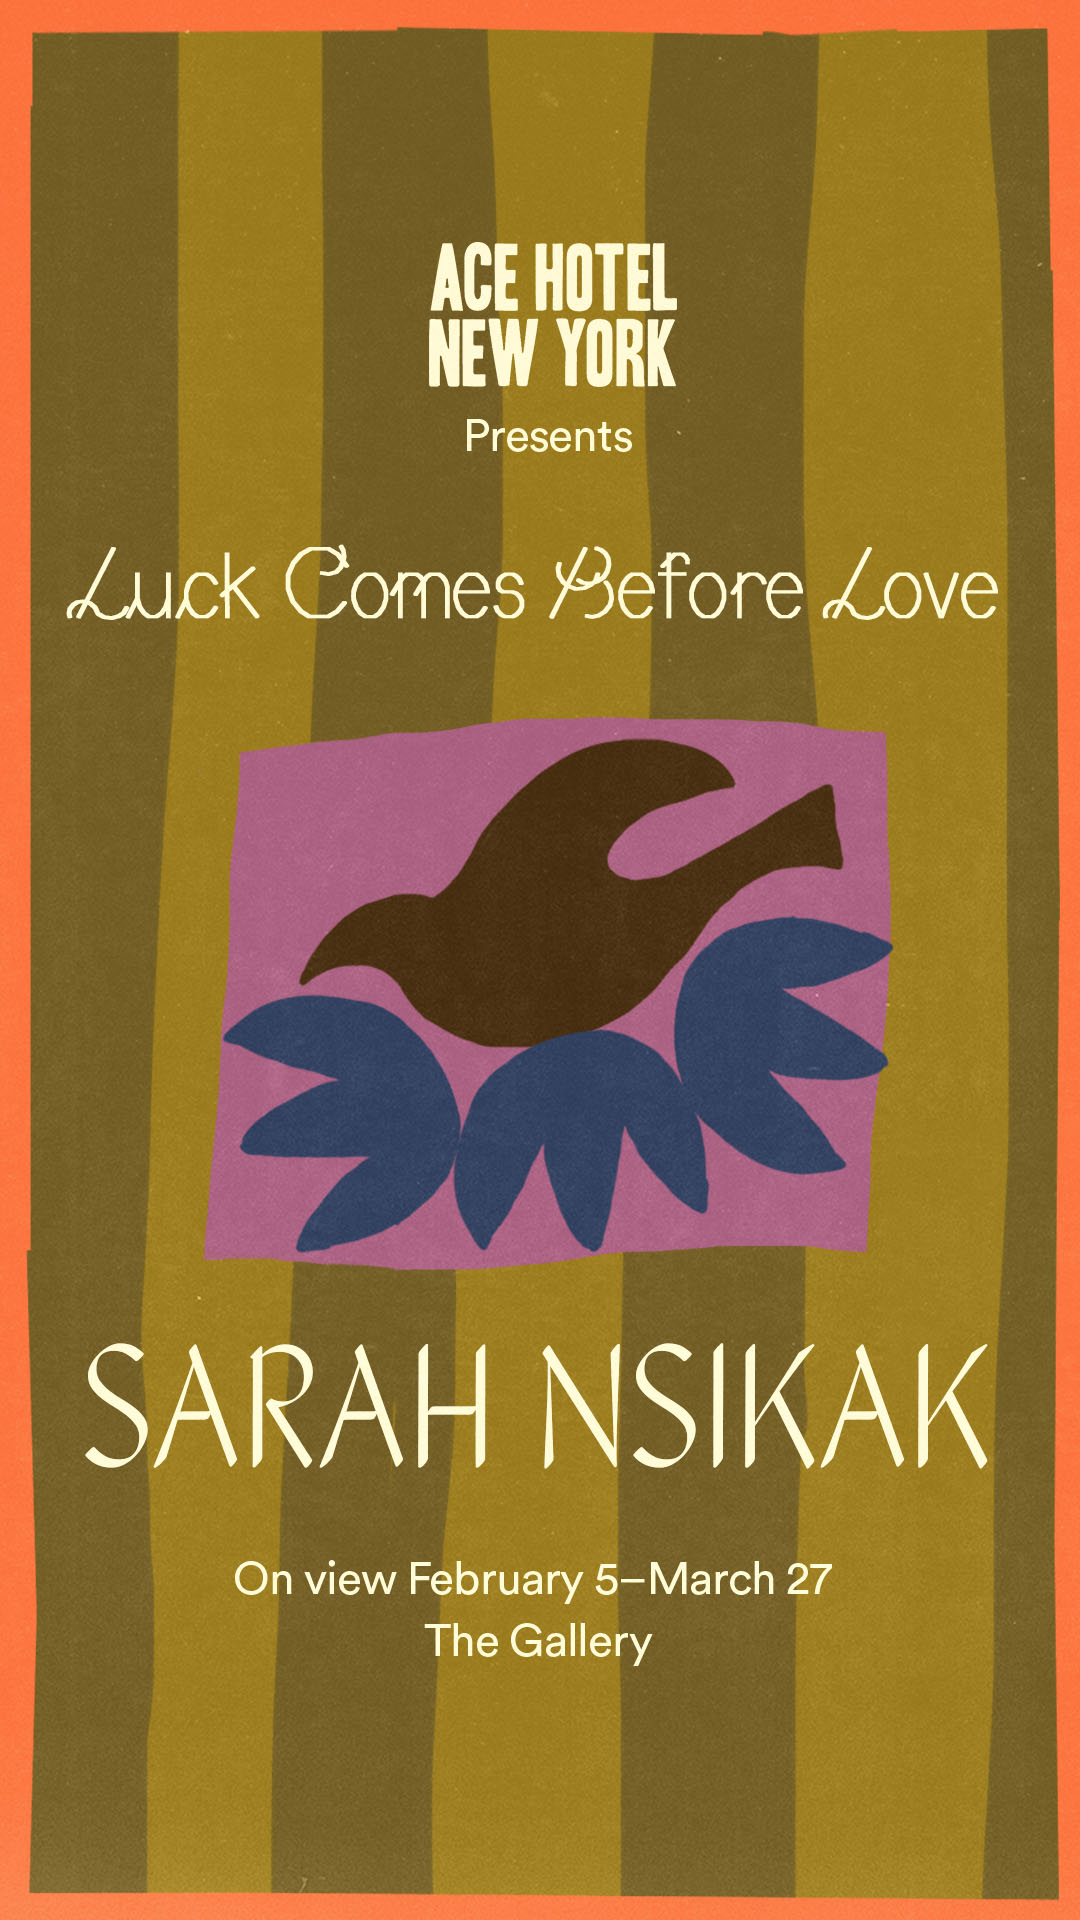 Luck Comes Before Love - Sarah Nsikak in The Gallery promo